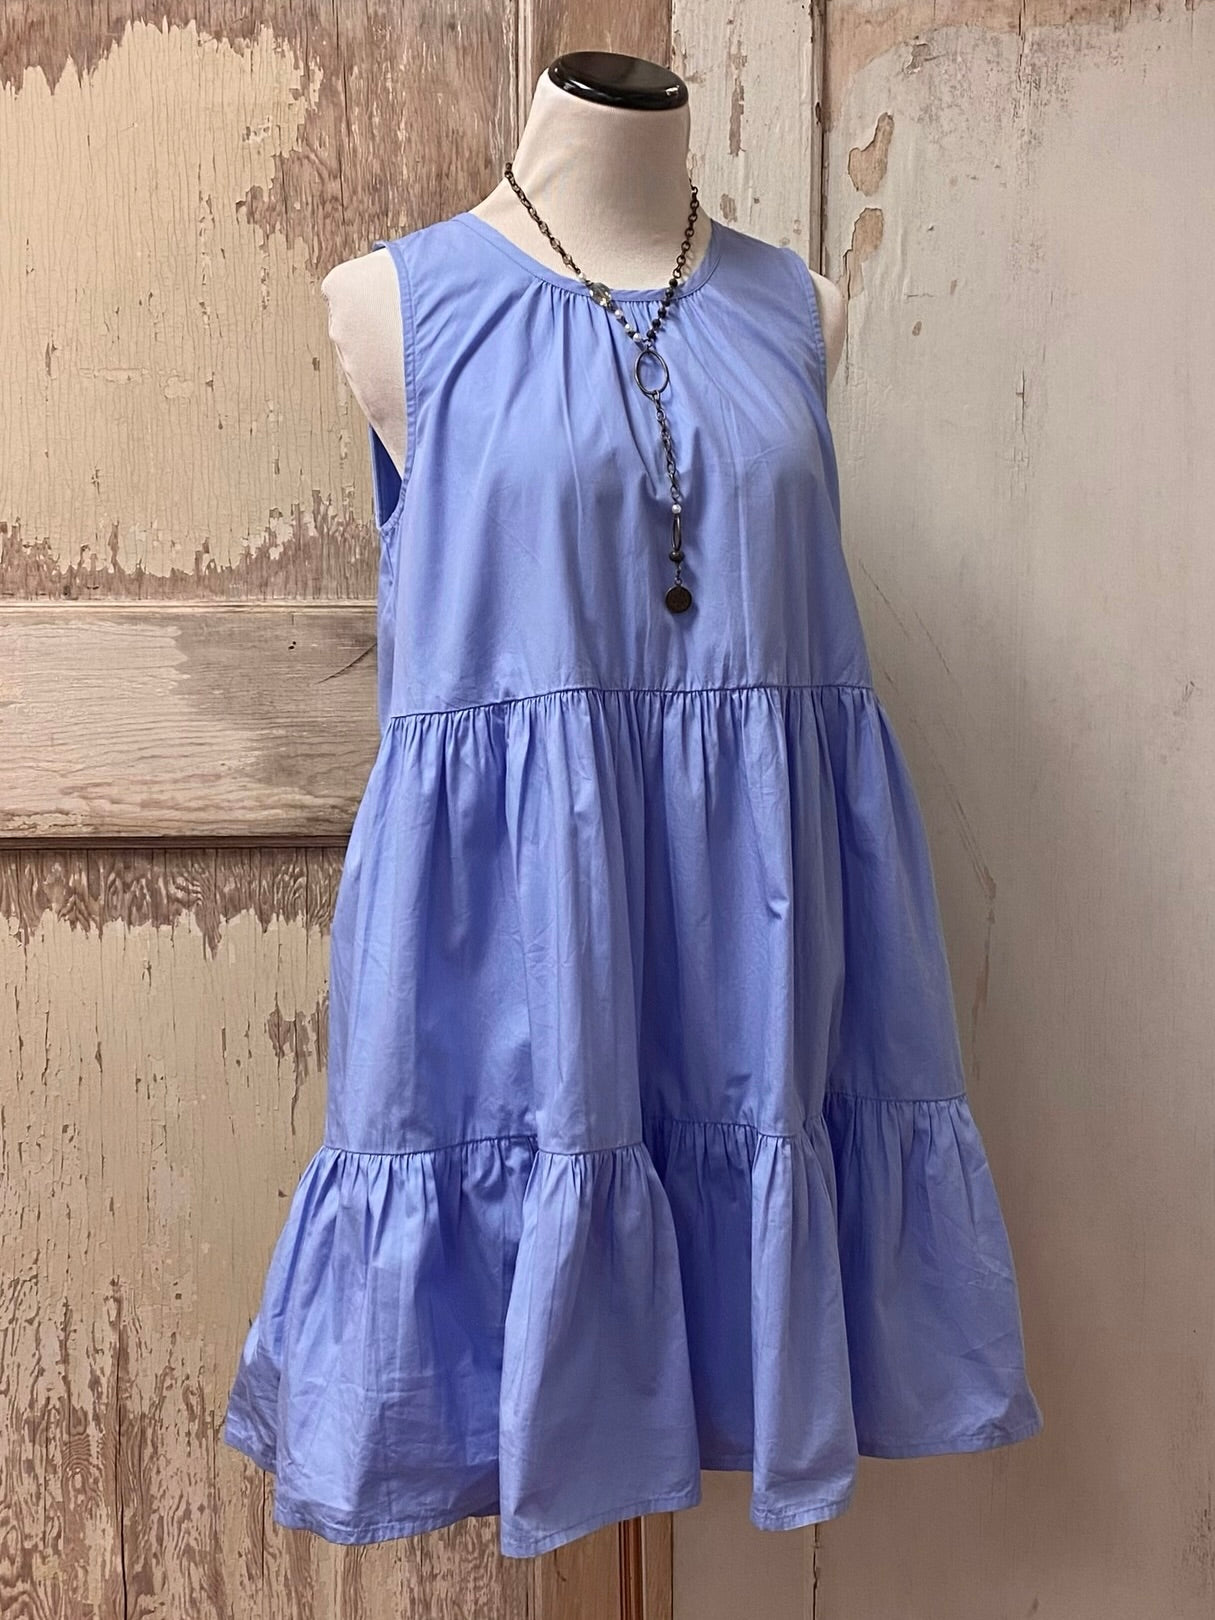 Periwinkle Bow Dress